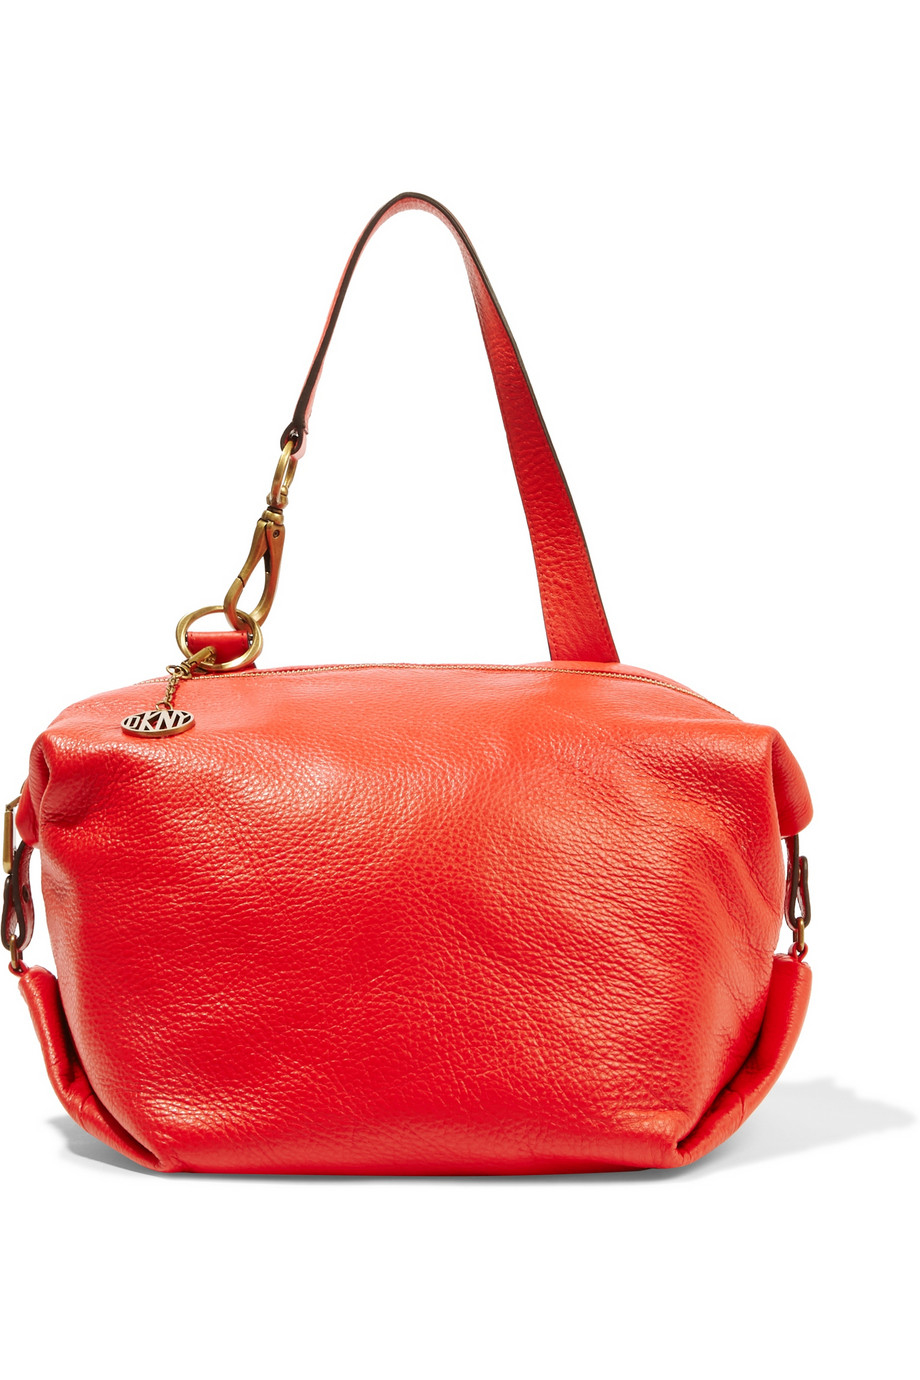 Dkny Two-tone Textured-leather Shoulder Bag | SEMA Data Co-op